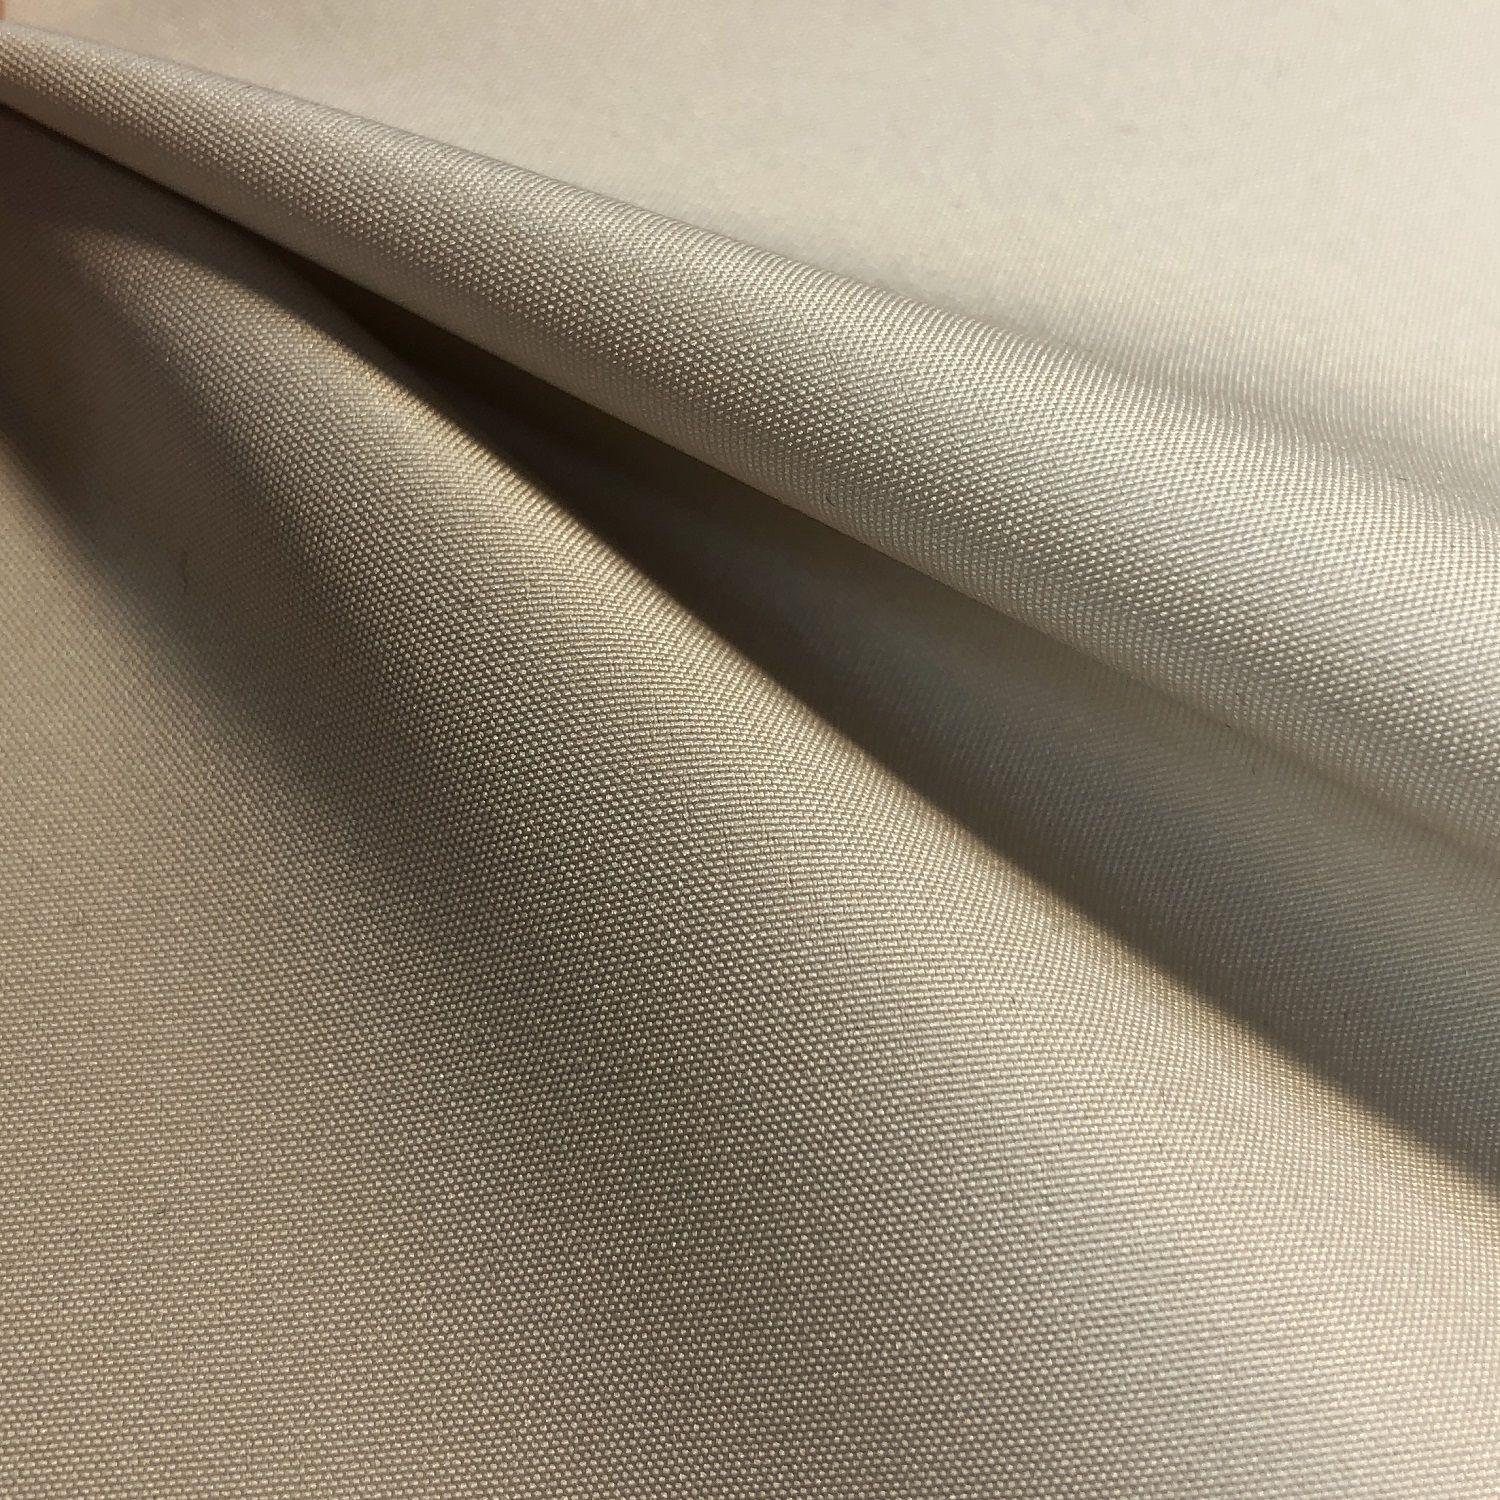 Recycled Polyester Fabric: How It's Made and Why It Matters